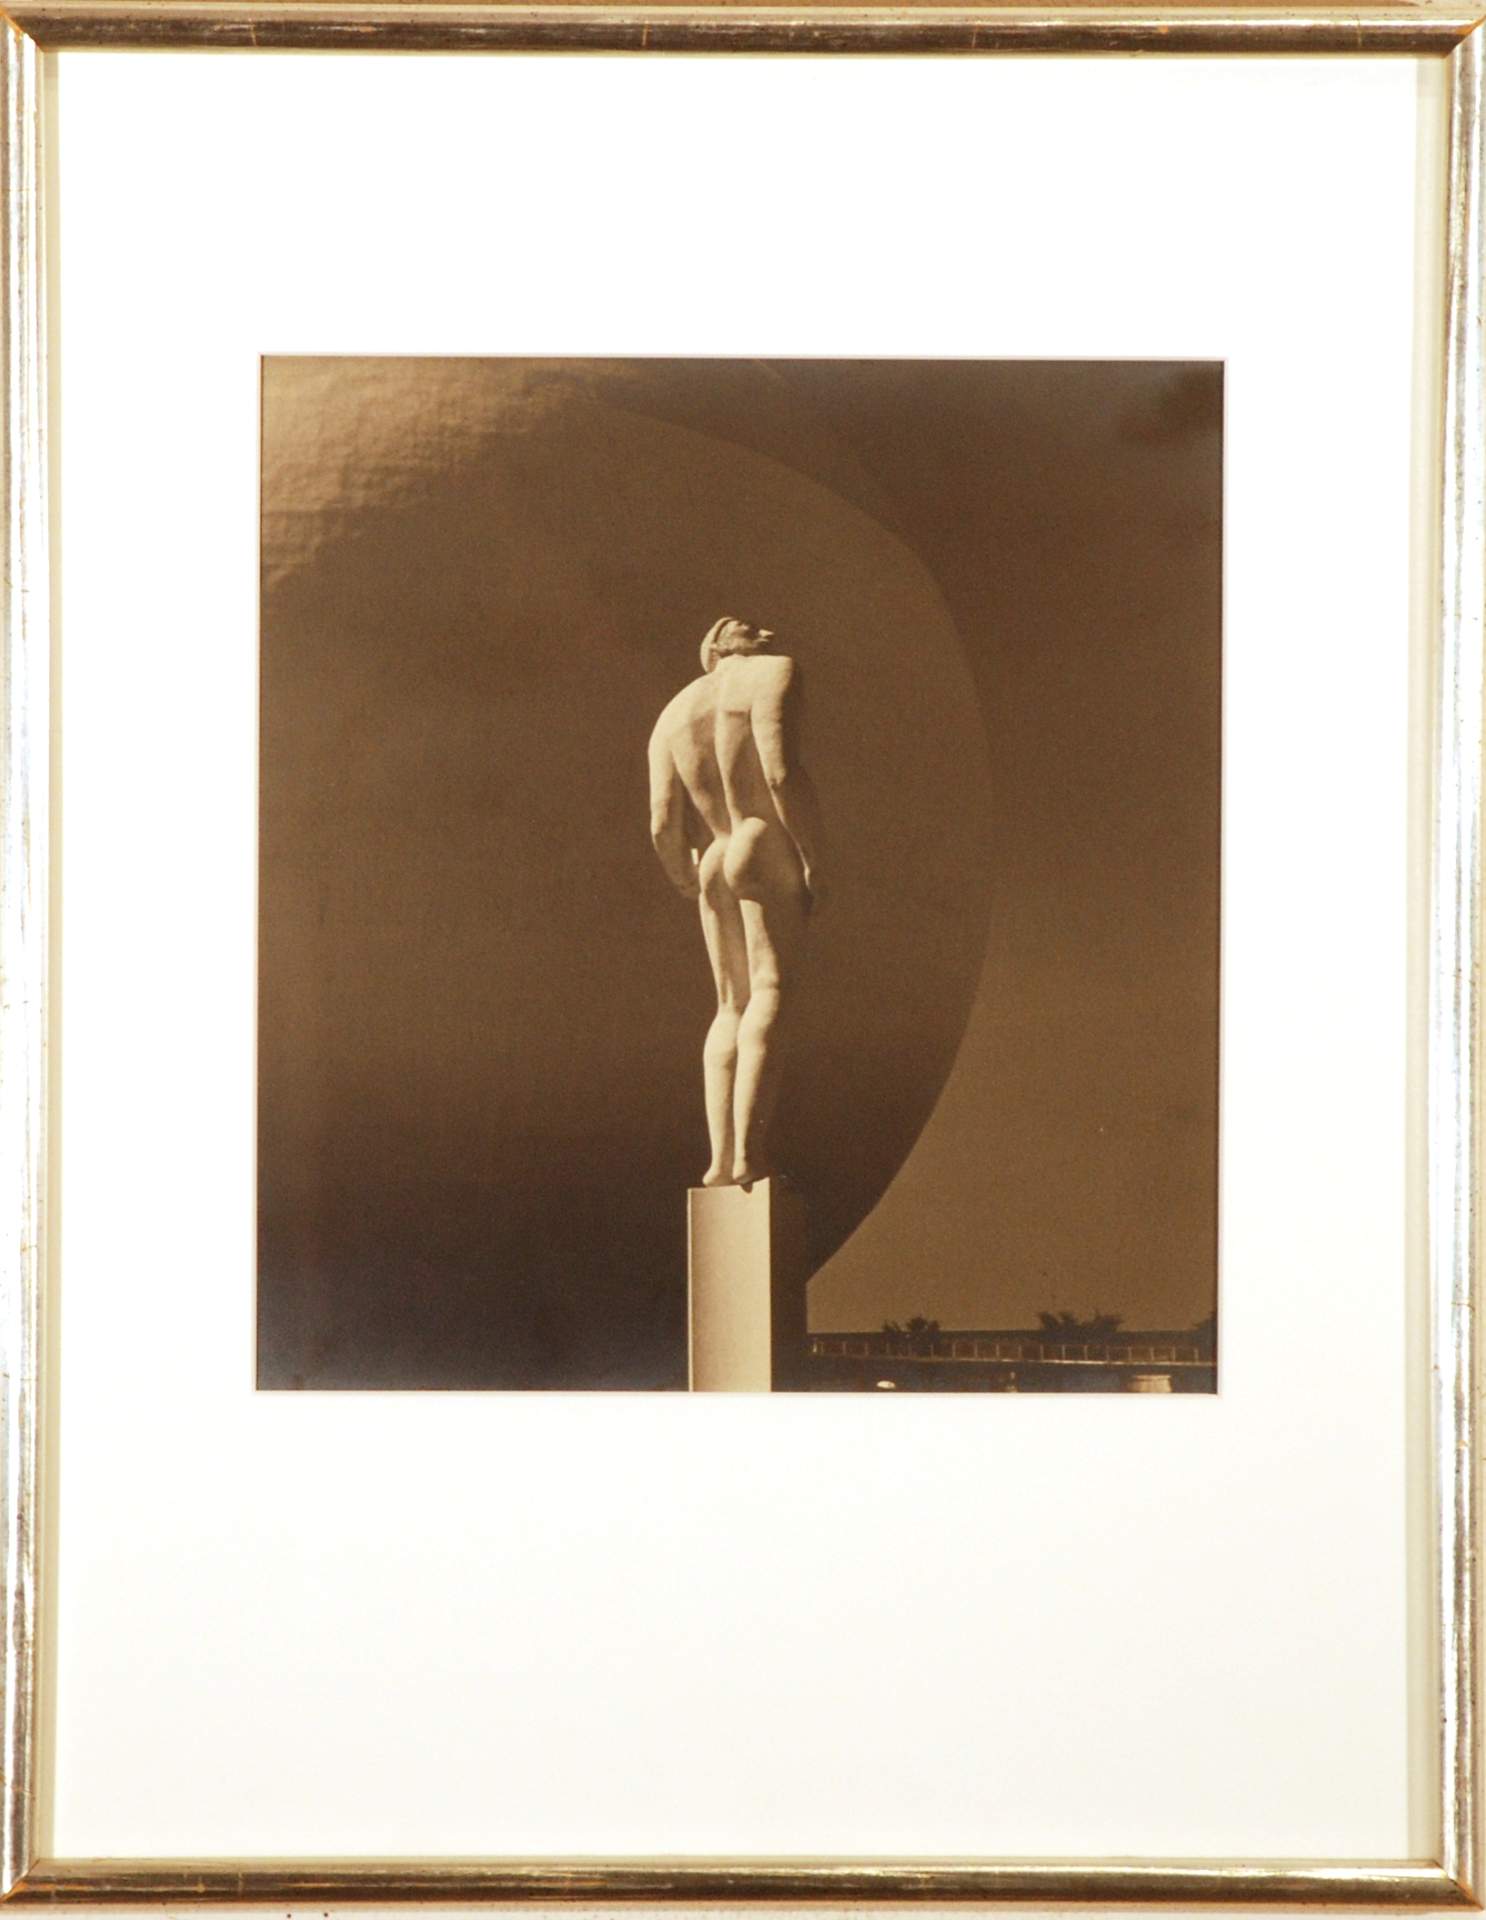 Untitled [The Astronomer by Carl Milles by The Perisphere at the New York World's Fair, 1939-40]